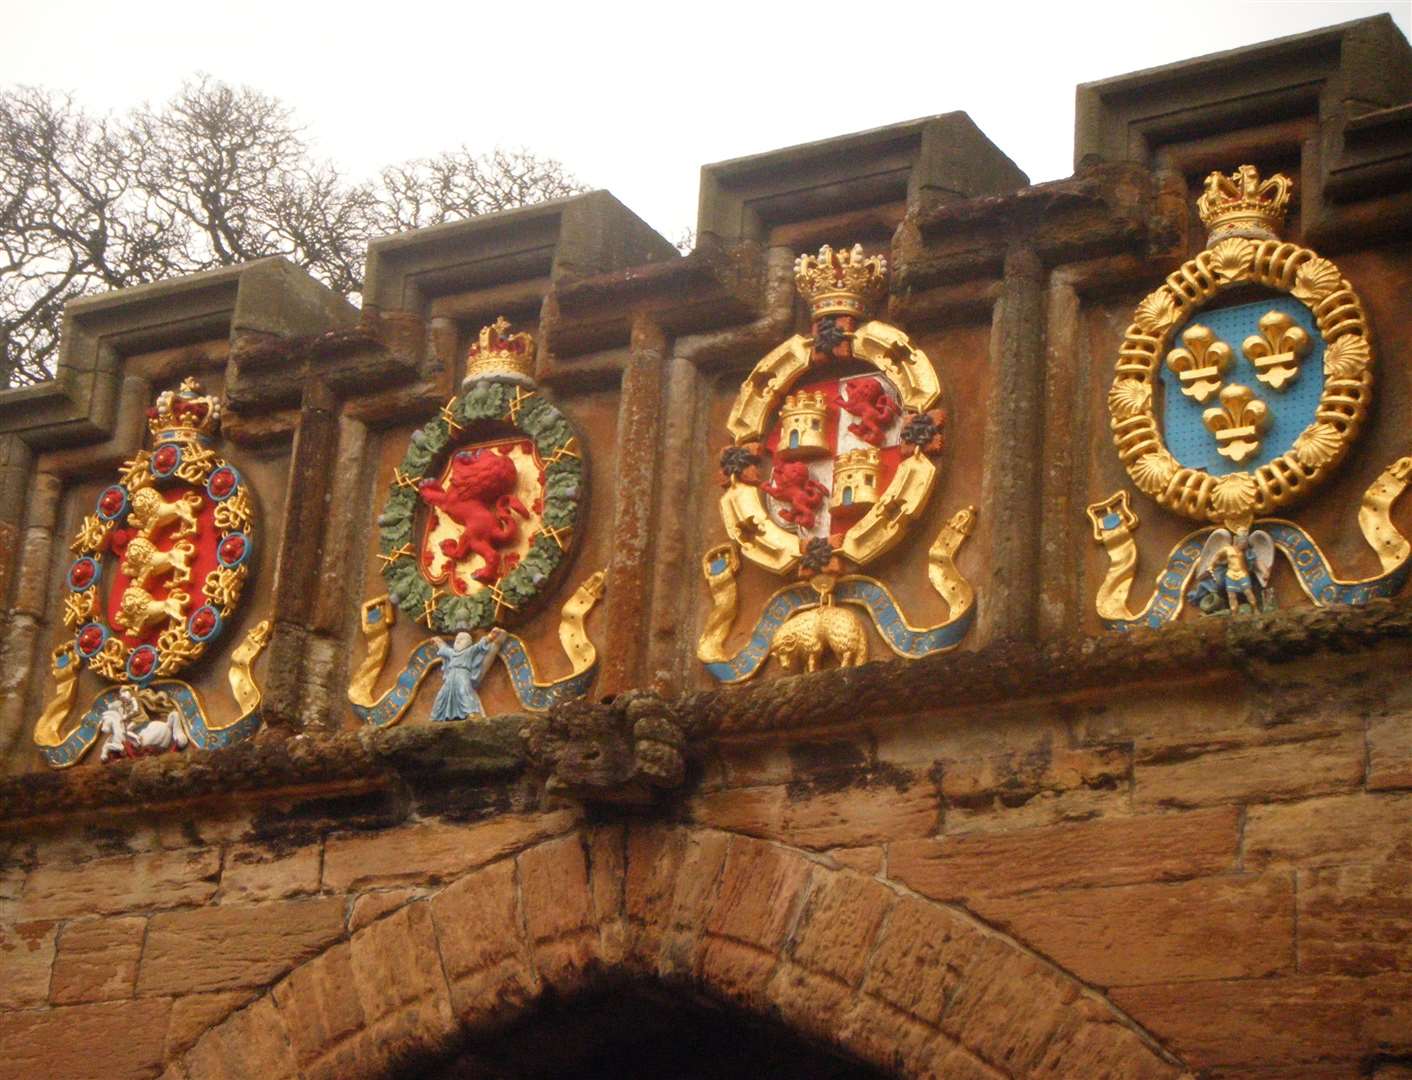 Kings and Queens Tour: the royal arms displayed at Linlithgow Palace